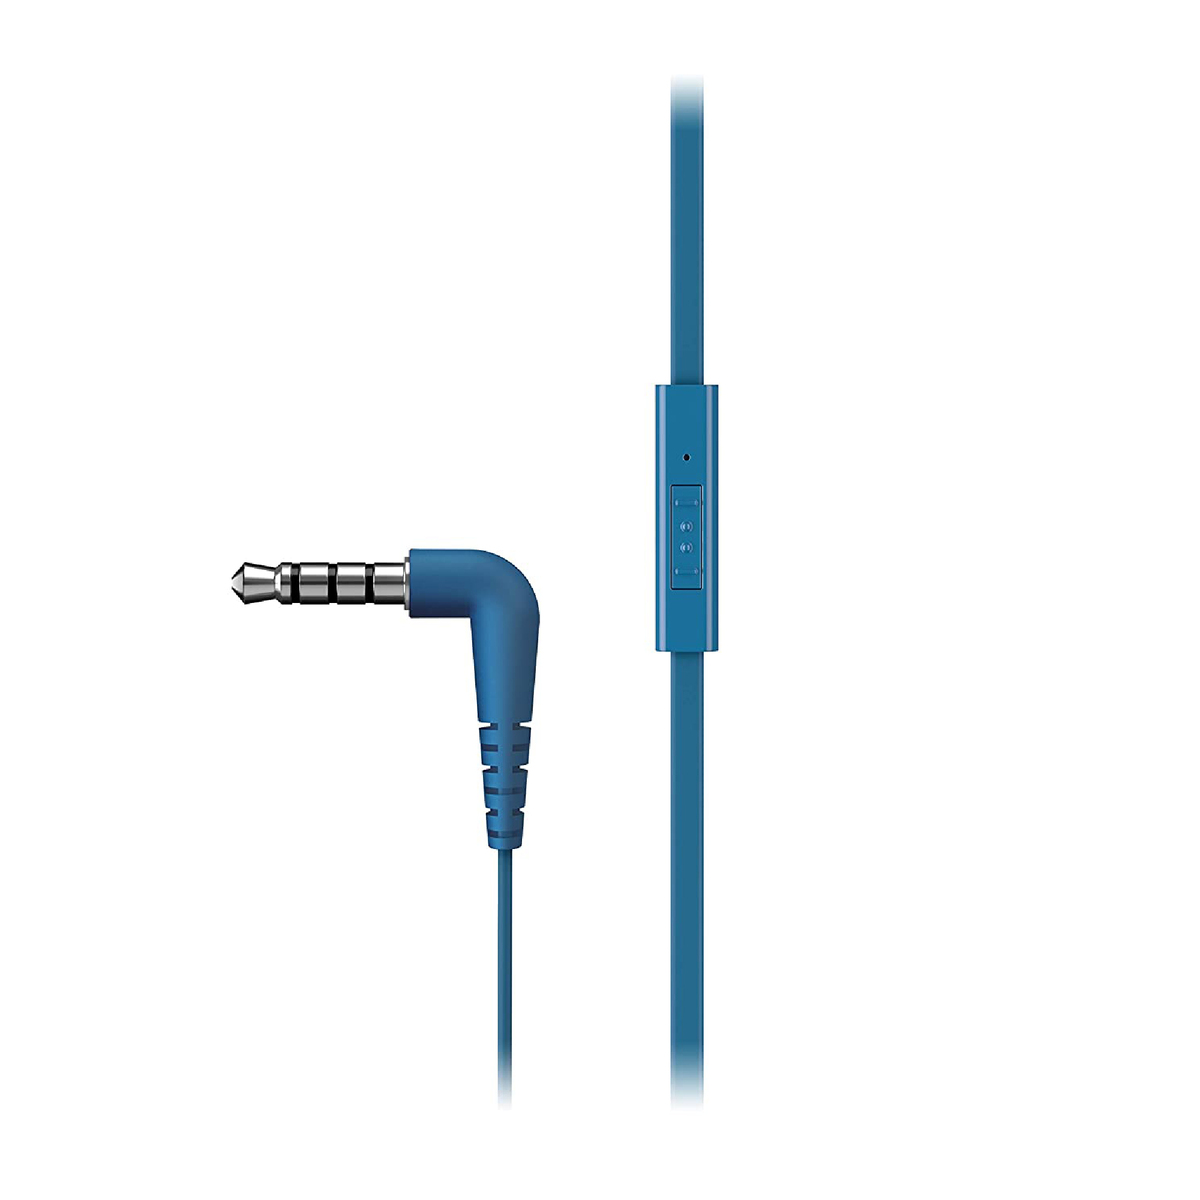 Panasonic Extra Bass in-Ear Wired Earphone RP-TCM130 Blue